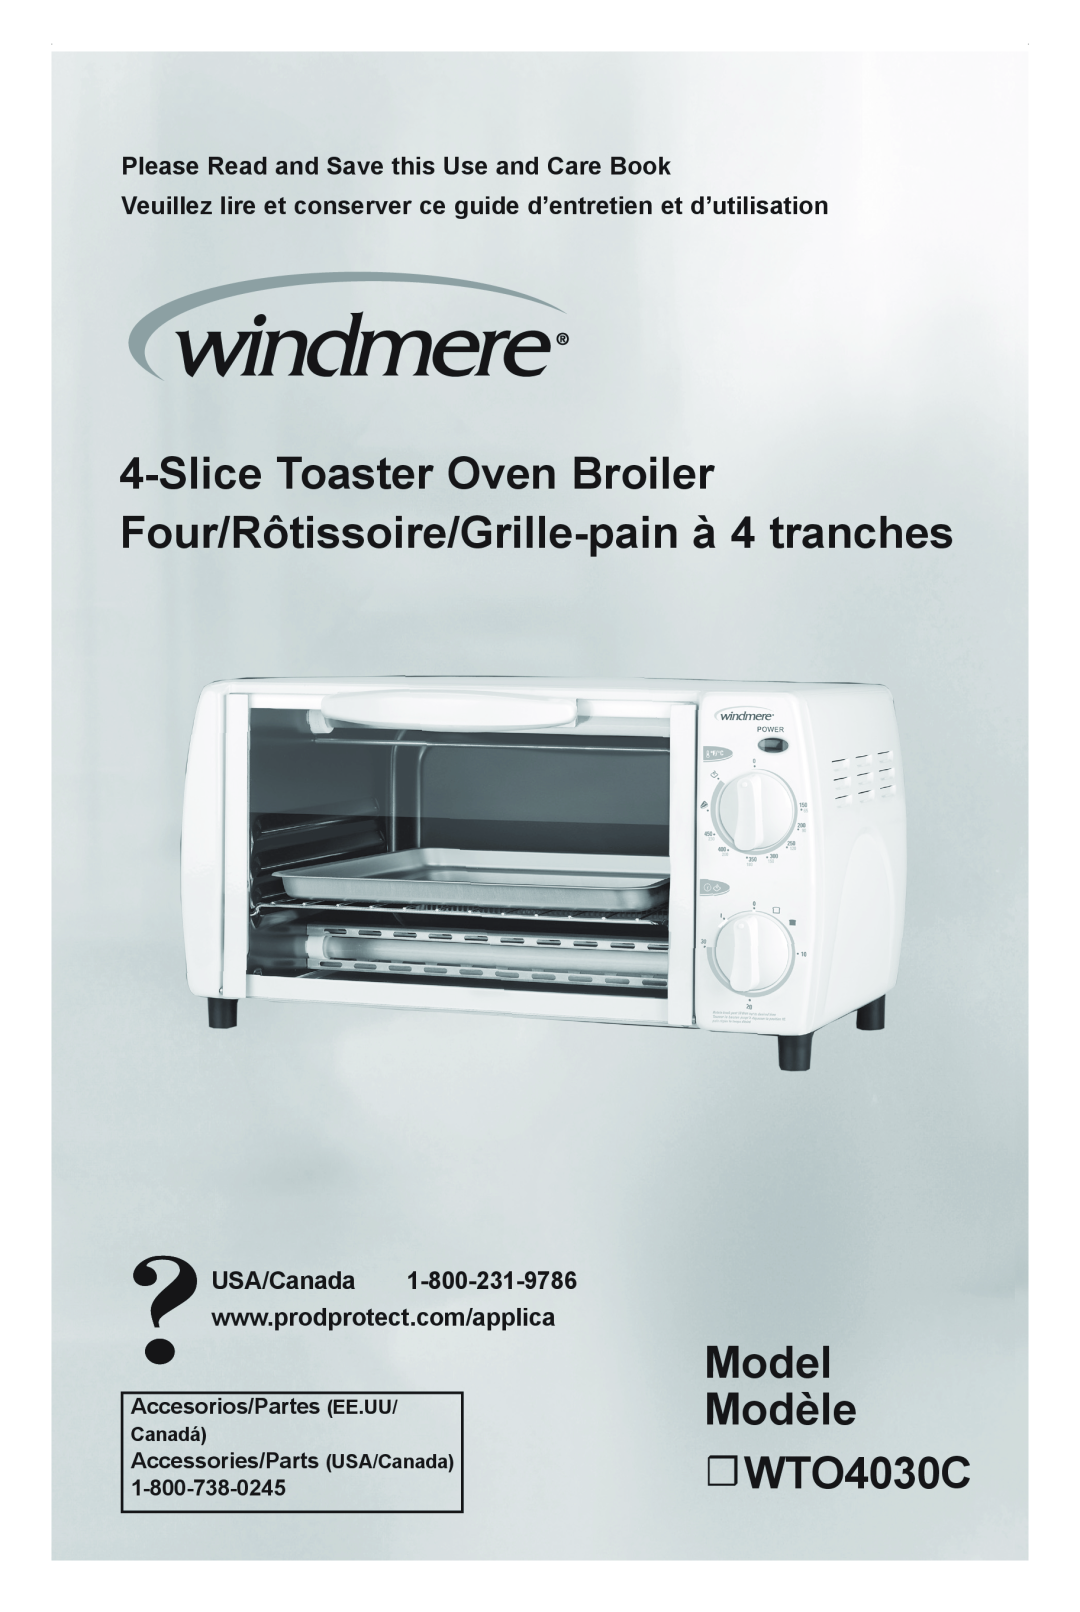 Windmere manual Slice Toaster Oven Broiler Four/Rôtissoire/Grille-pain à 4 tranches, Model Modèle WTO4030C, USA/Canada 